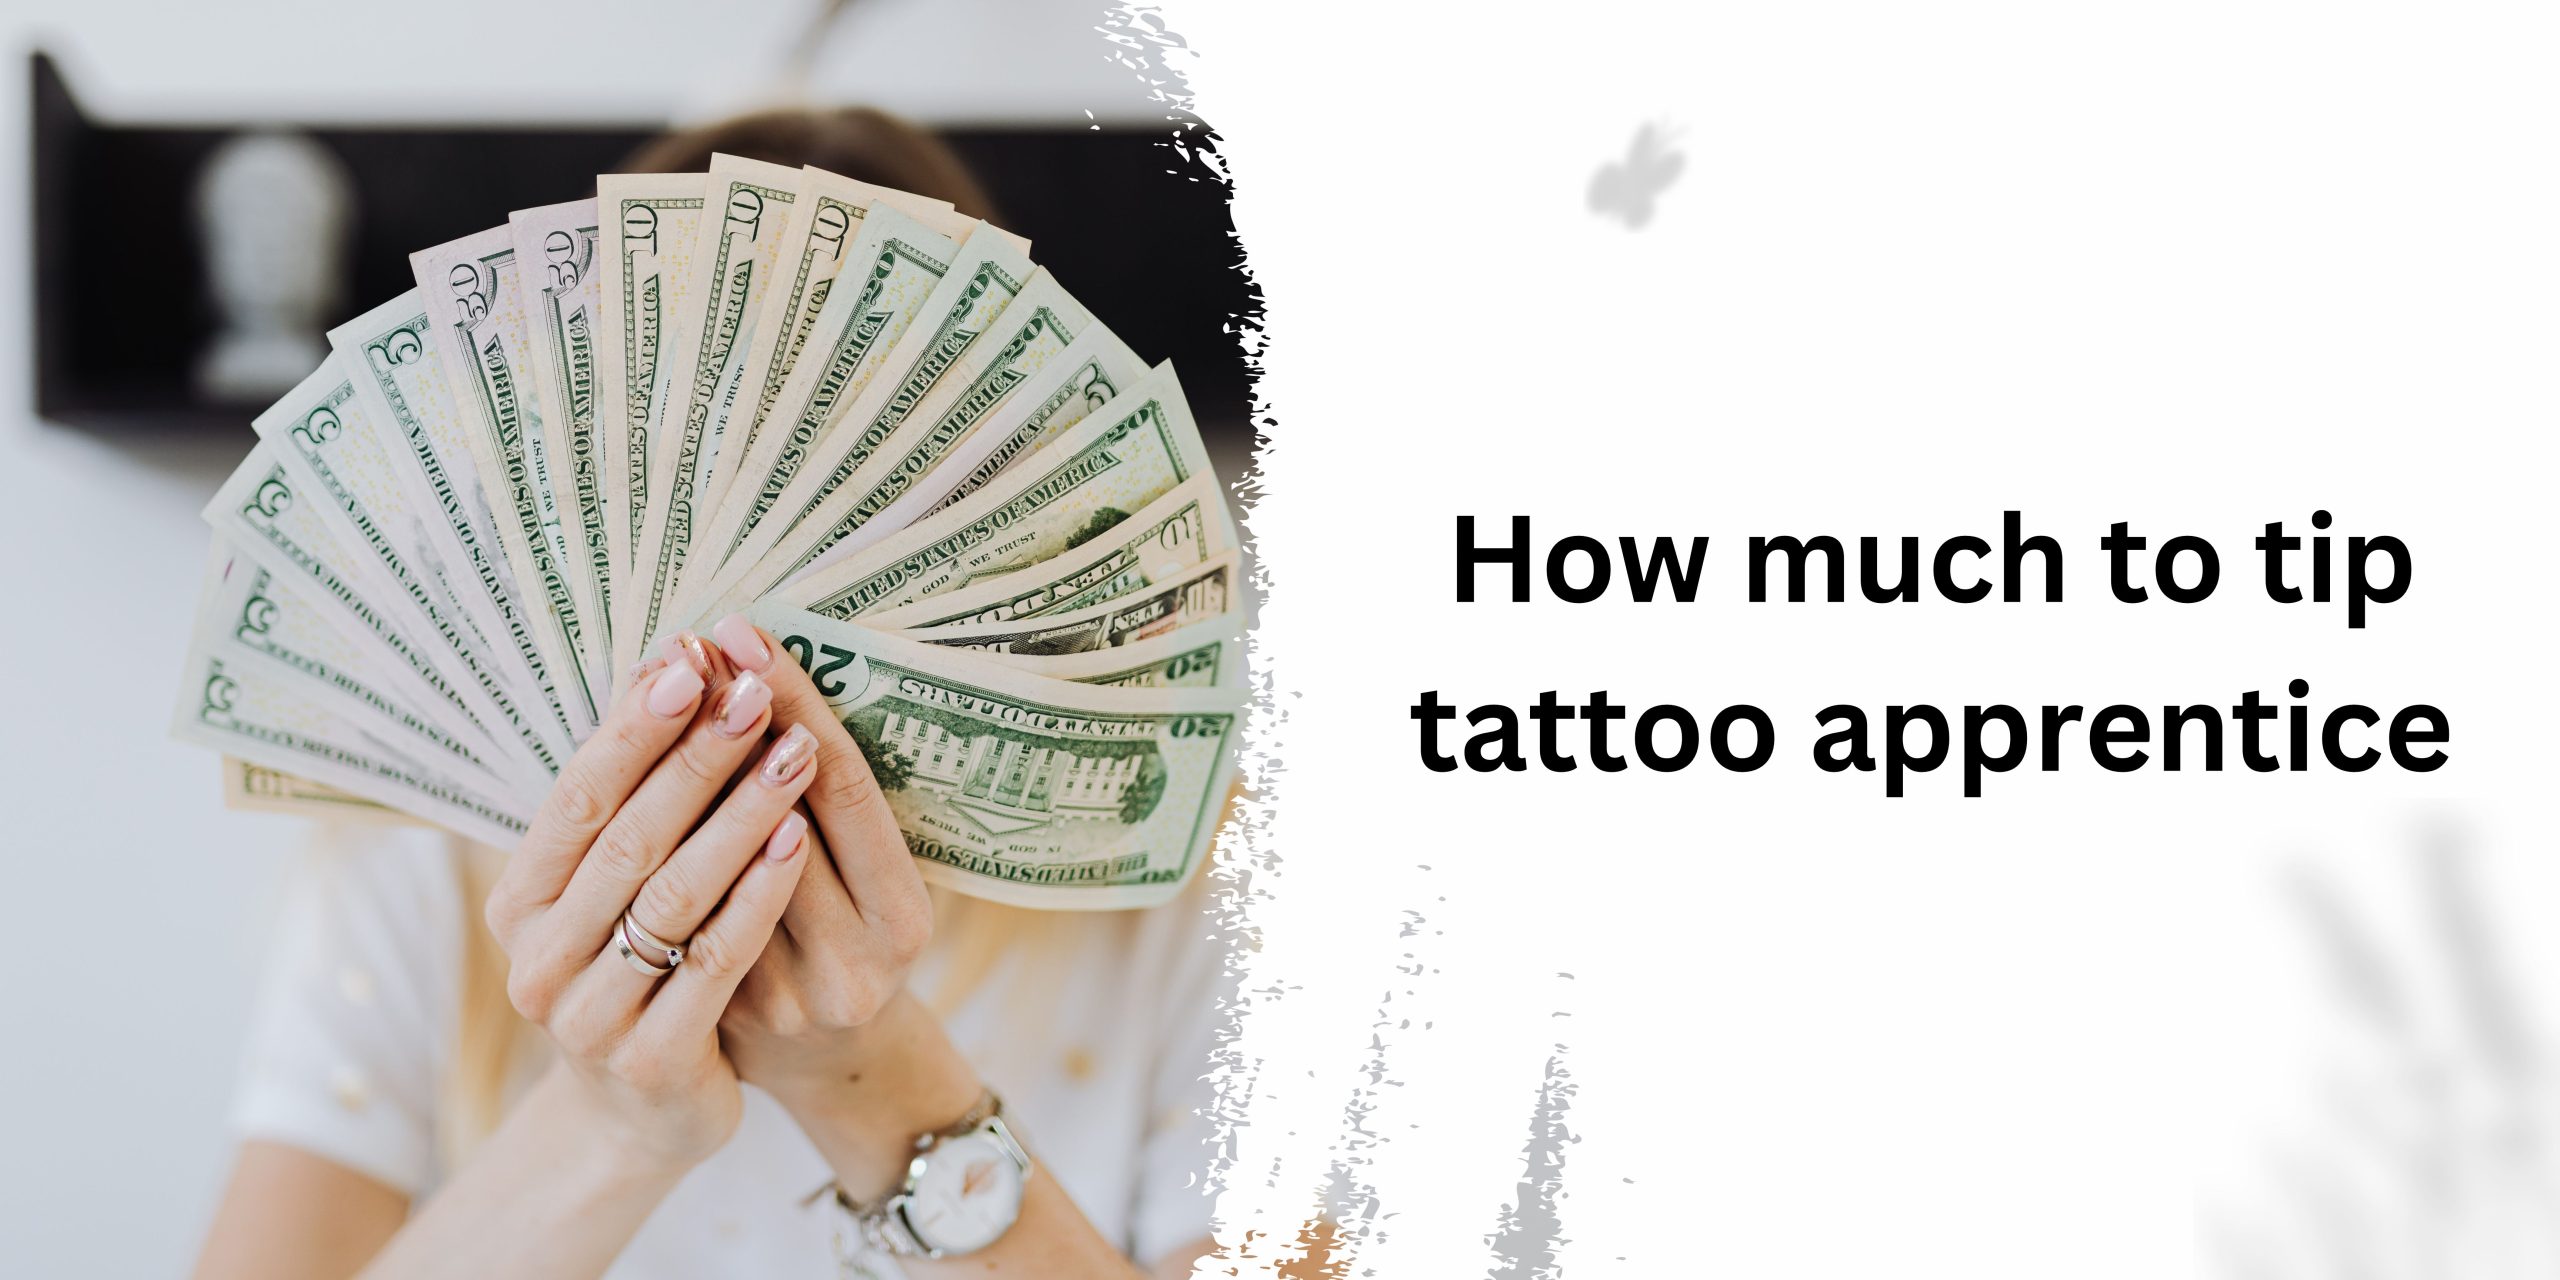 How much to tip tattoo apprentice